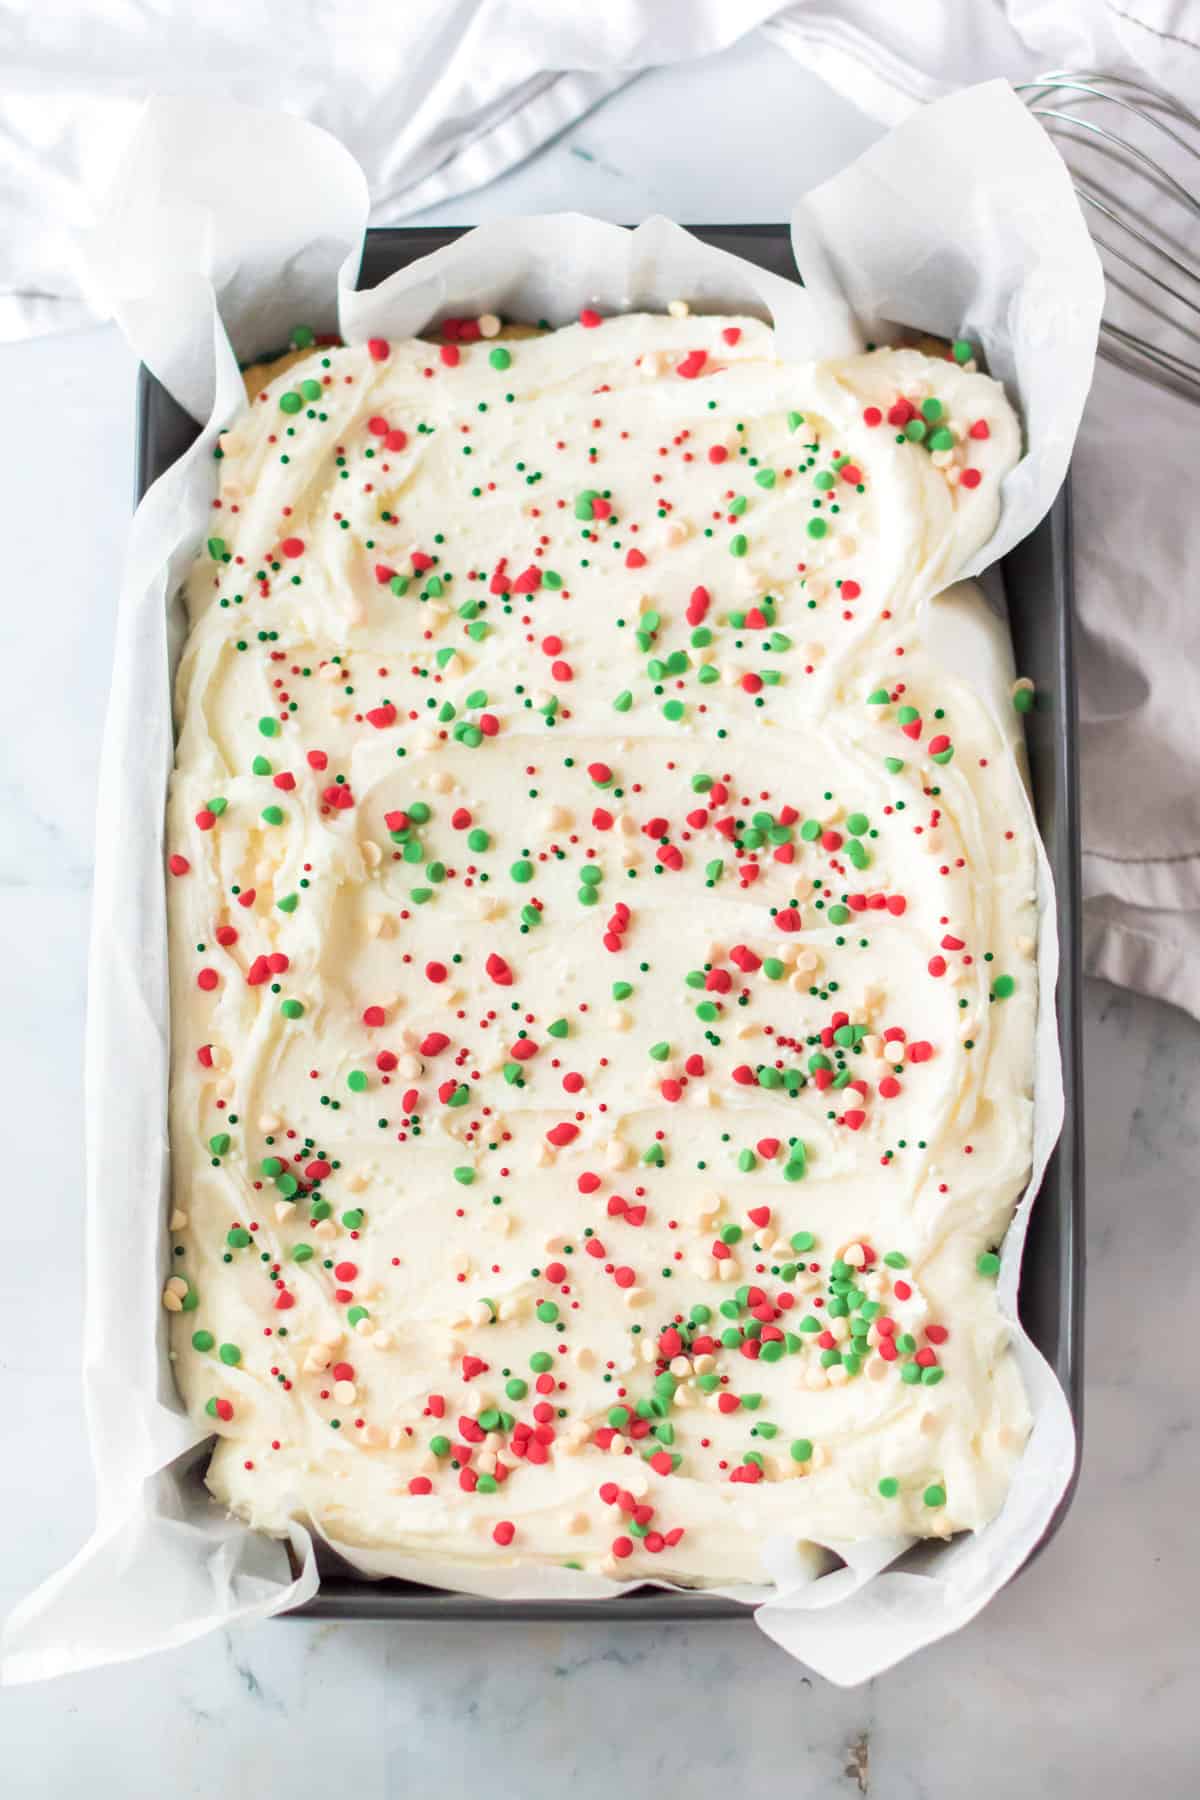 Pan of Holiday cookie bars topped with vanilla buttercream, holiday chips, and sprinkles.